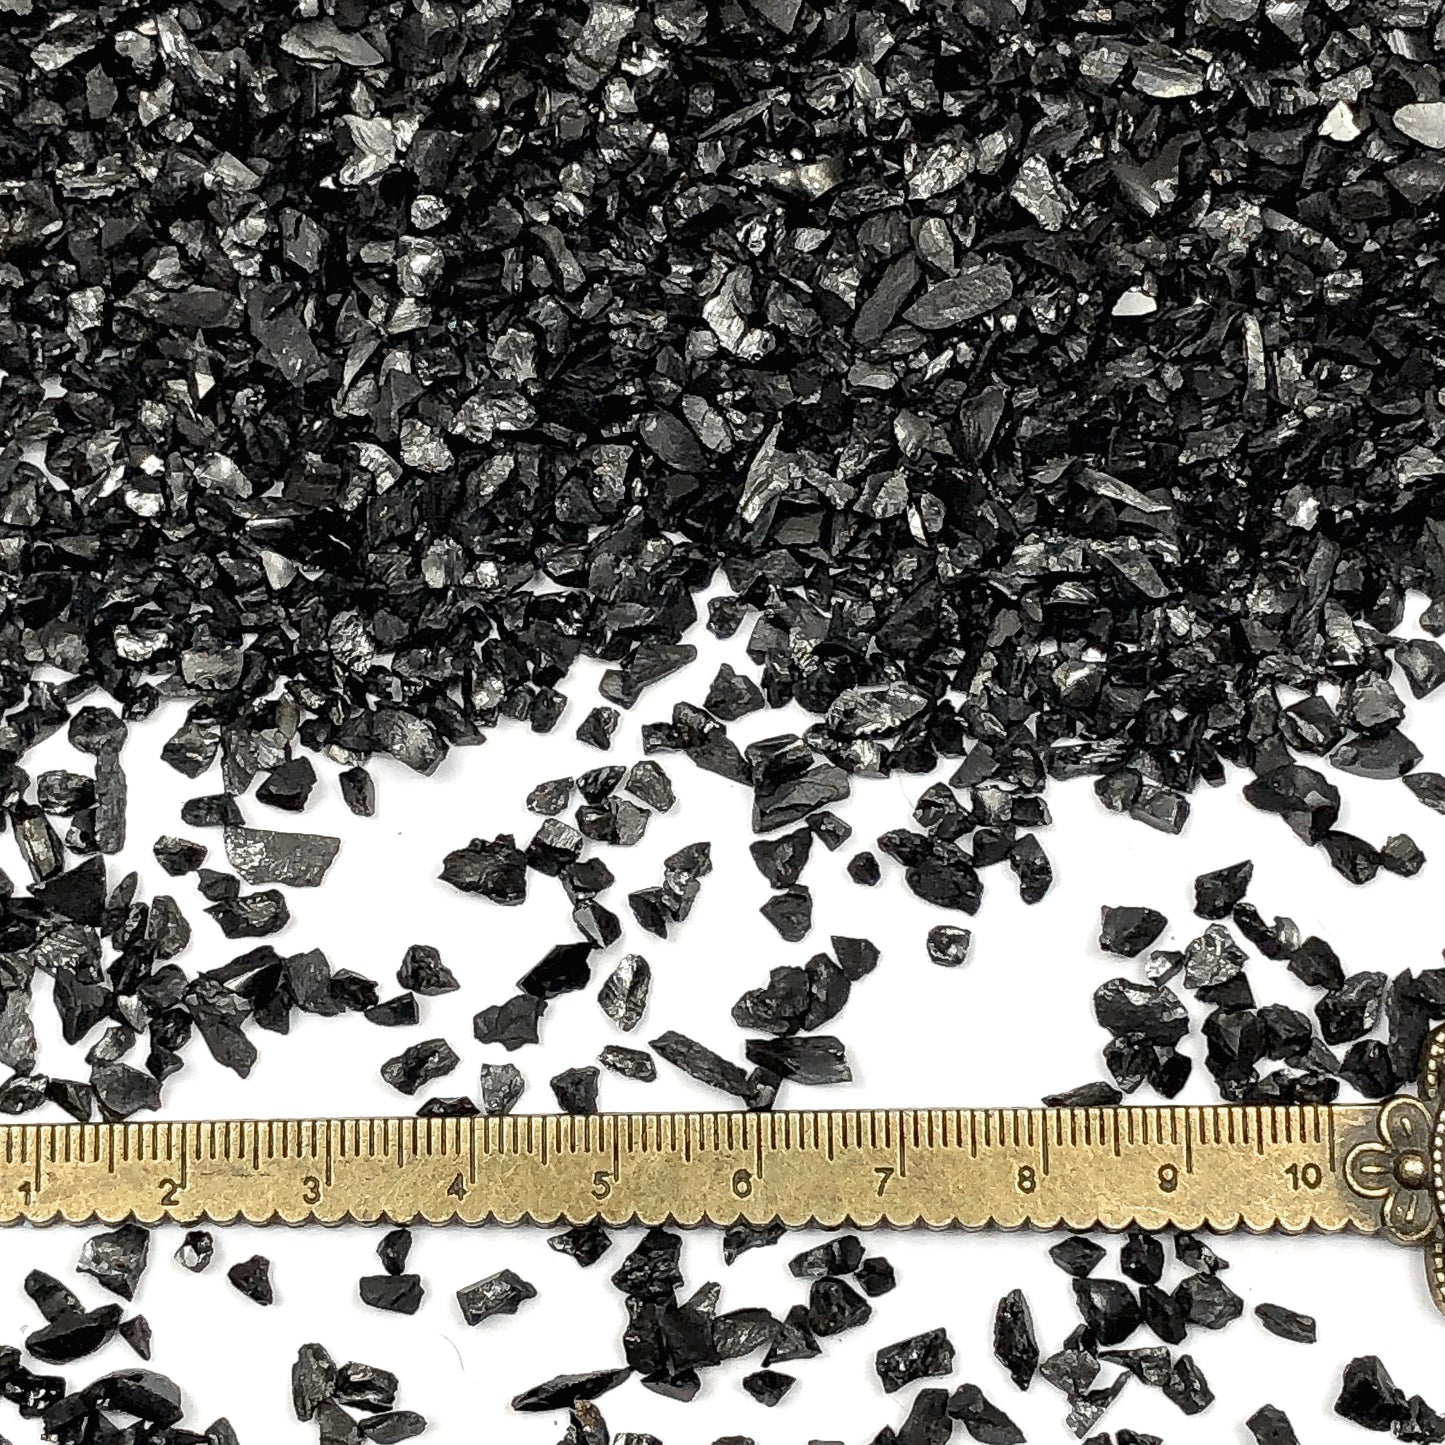 Crushed Black Jet from The United States, Coarse Crush, Gravel Size, 4mm - 2mm